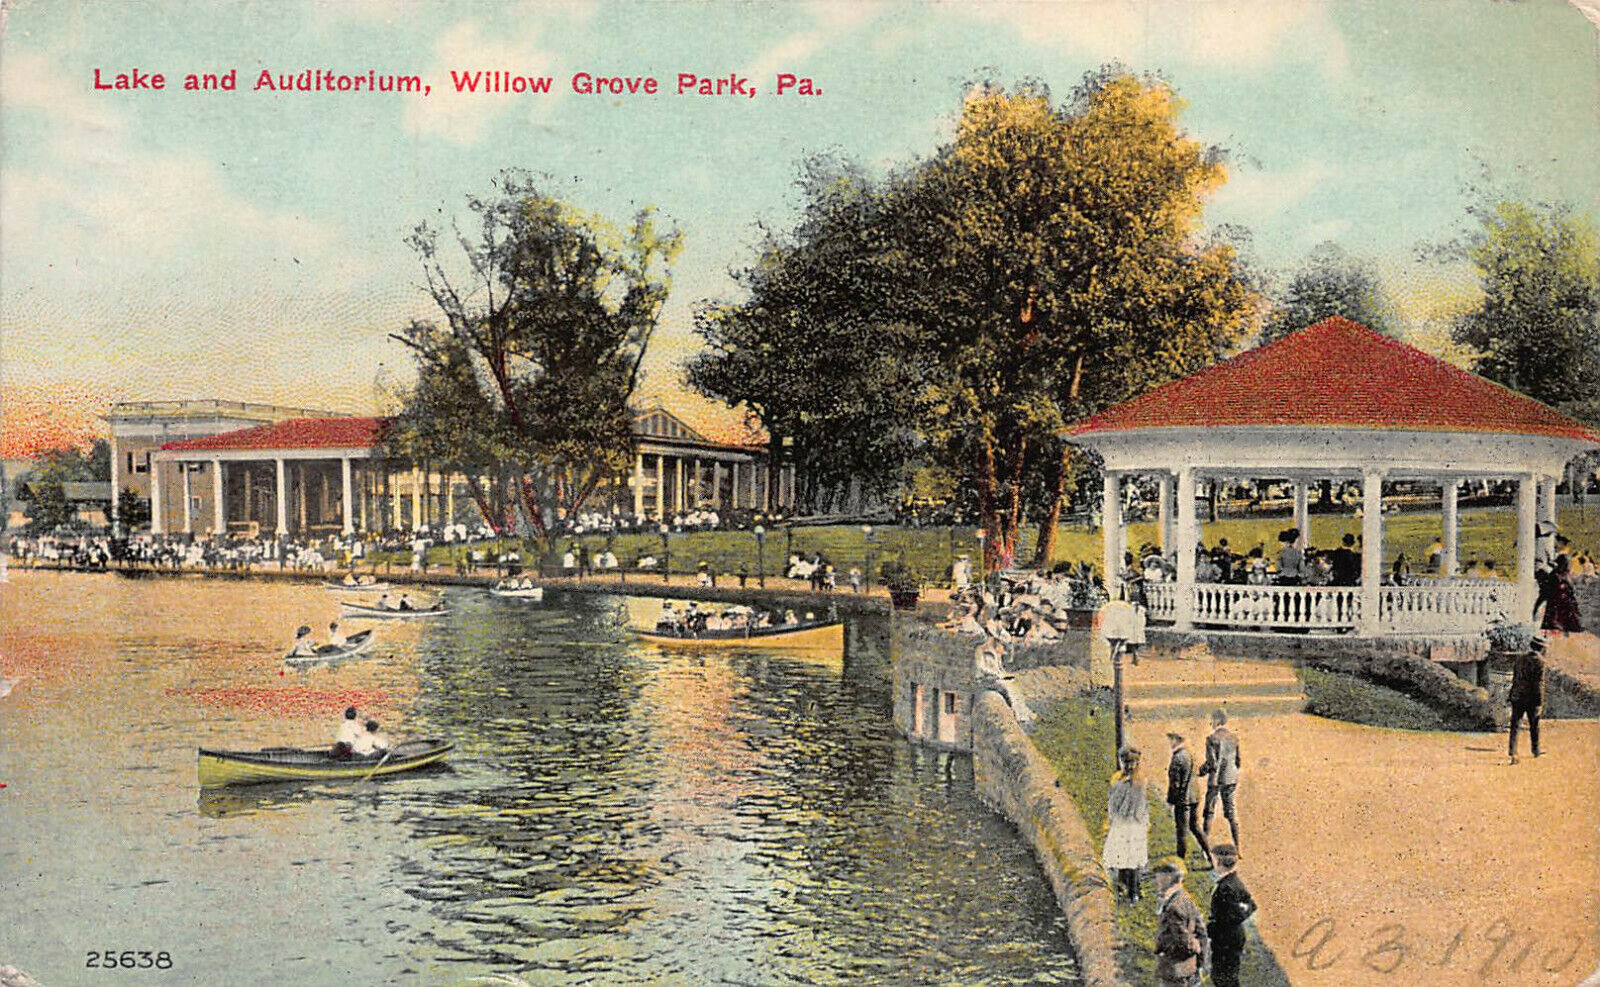 Lake and Auditorium, Willow Grove Park, PA, early postcard, used in 1910.